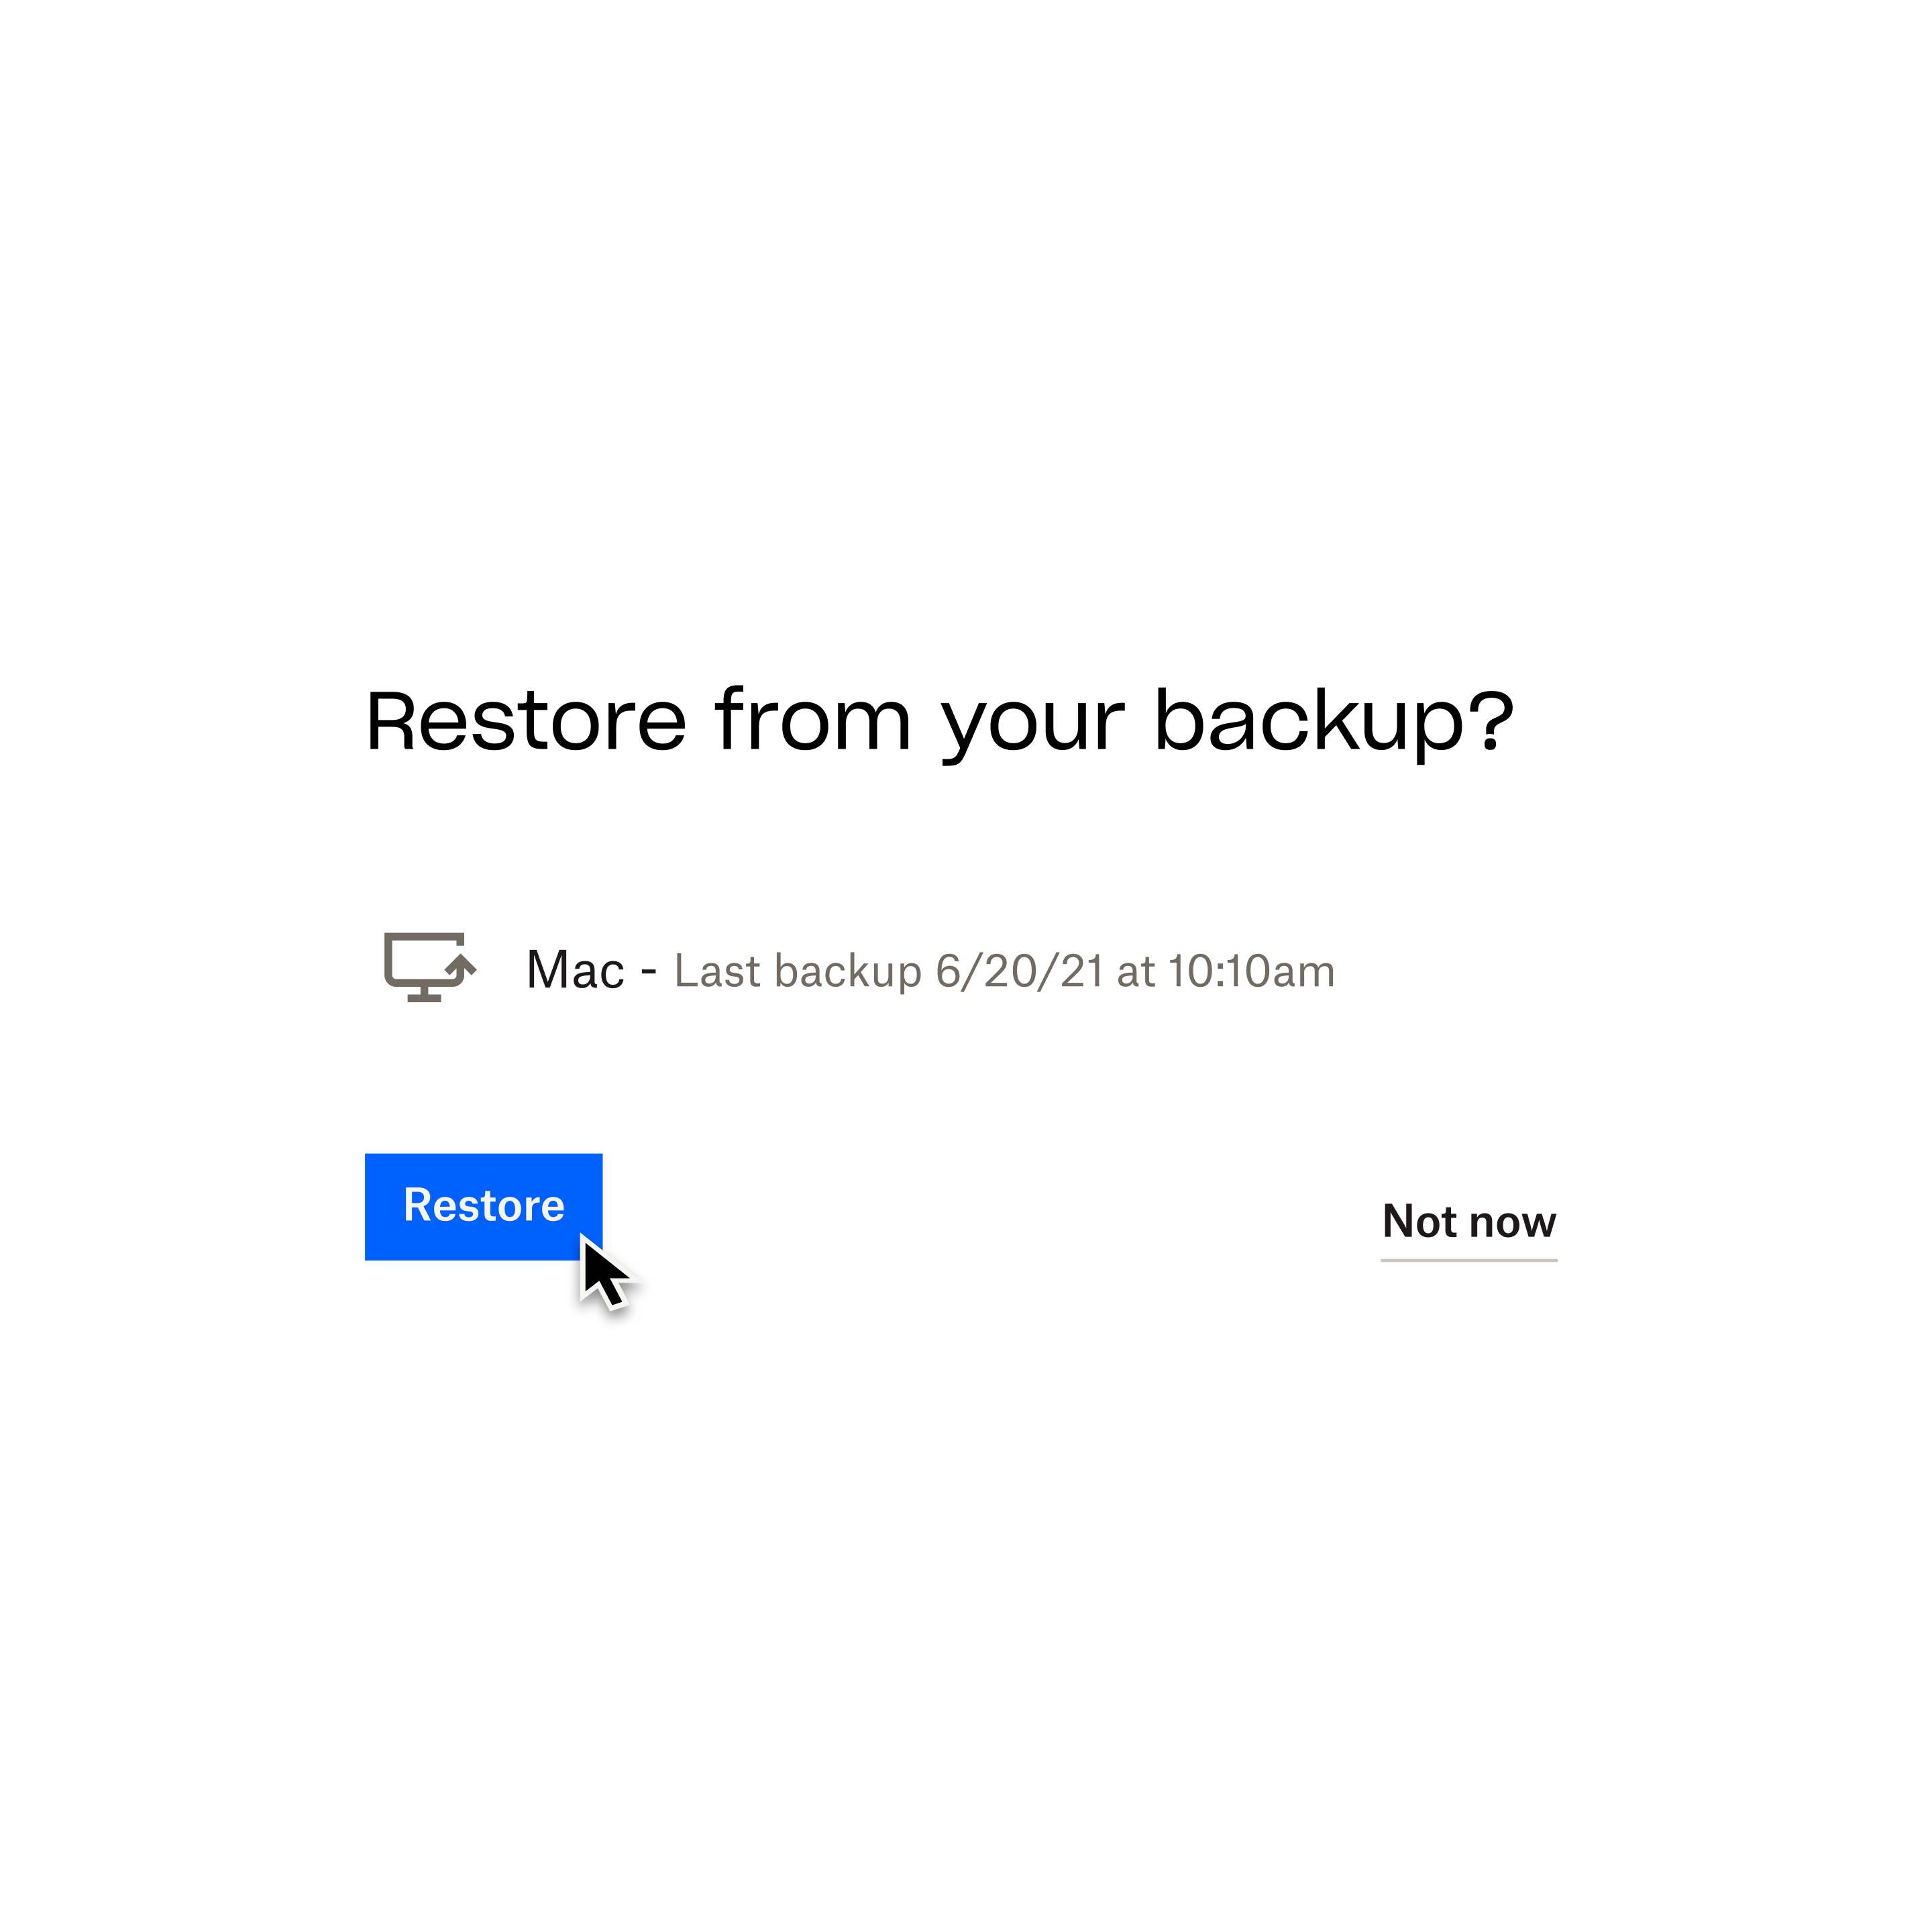 A mouse cursor hovers over a “Restore” button, underneath the question ‘Restore from your backup?”